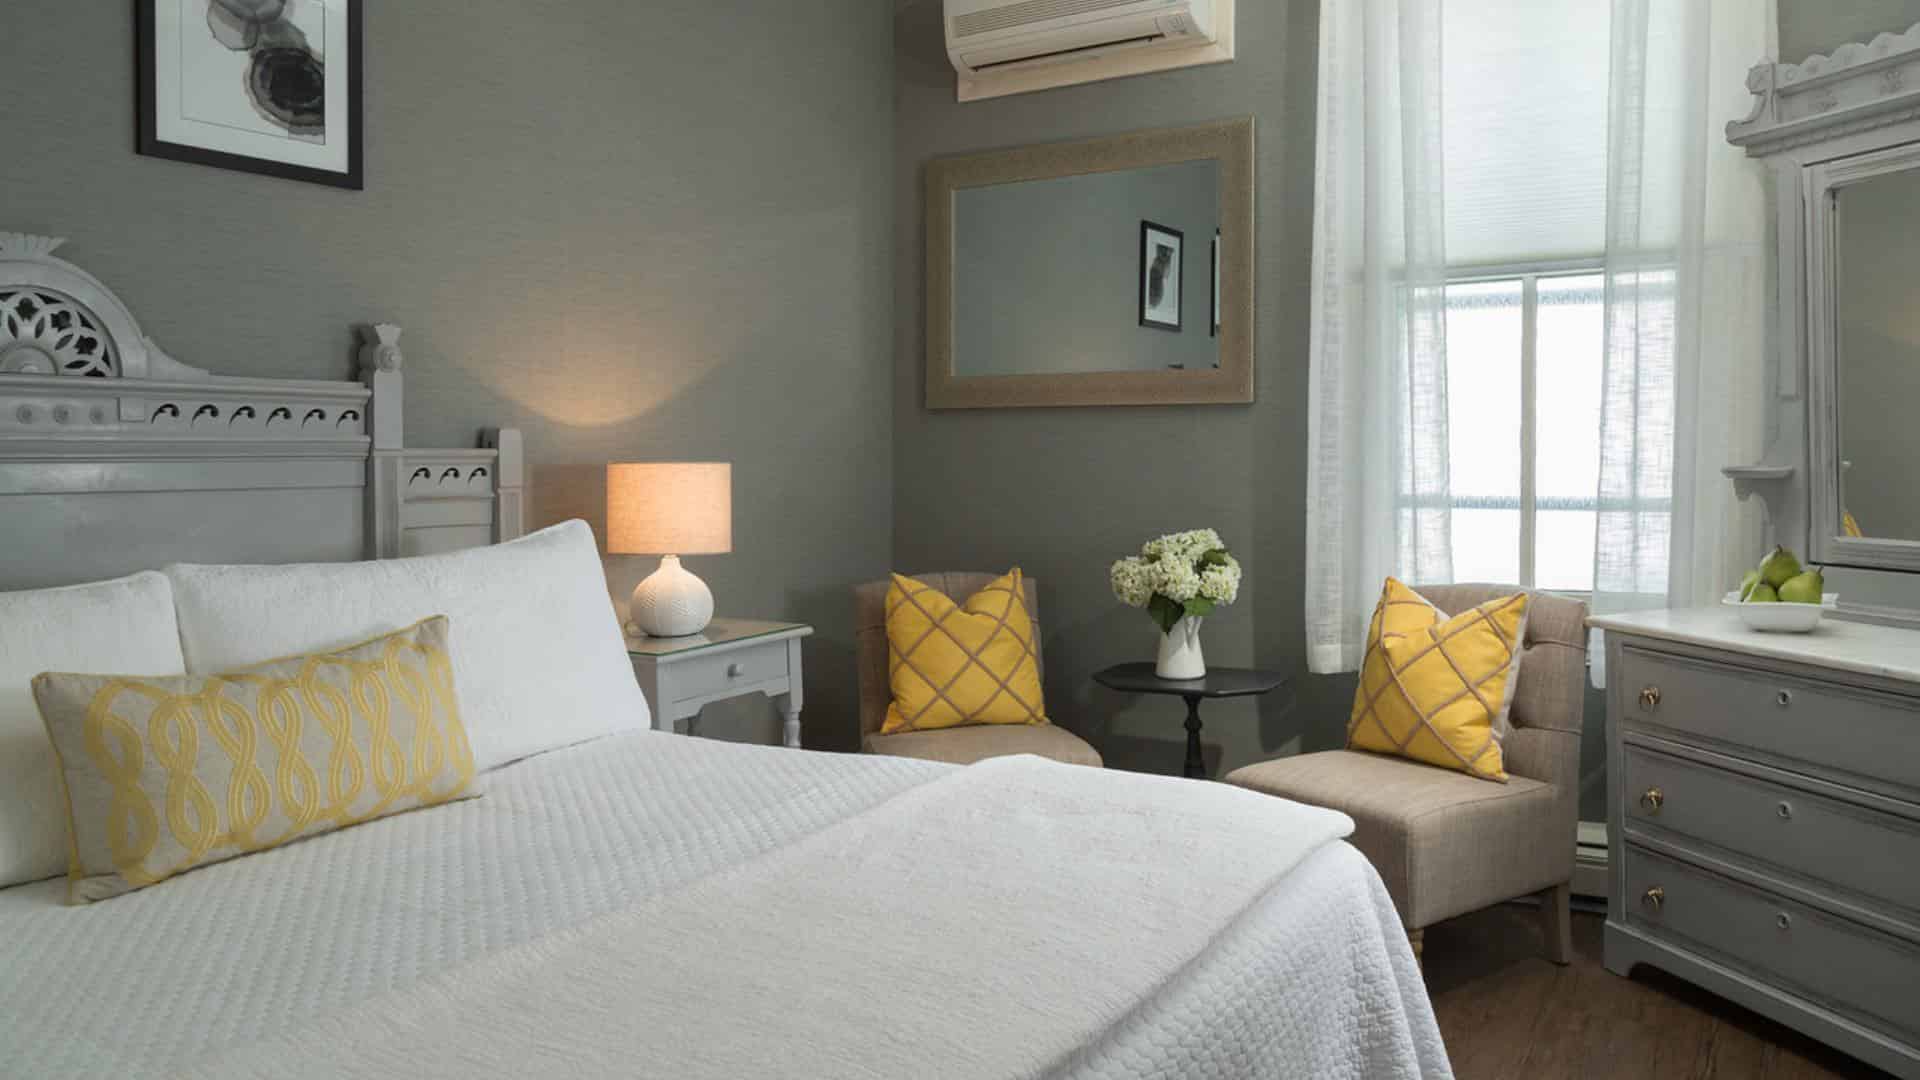 Bedroom with large gray headboard, white bedding, yellow pillows, hardwood flooring, gray walls, and gray dresser with marble top and mirror